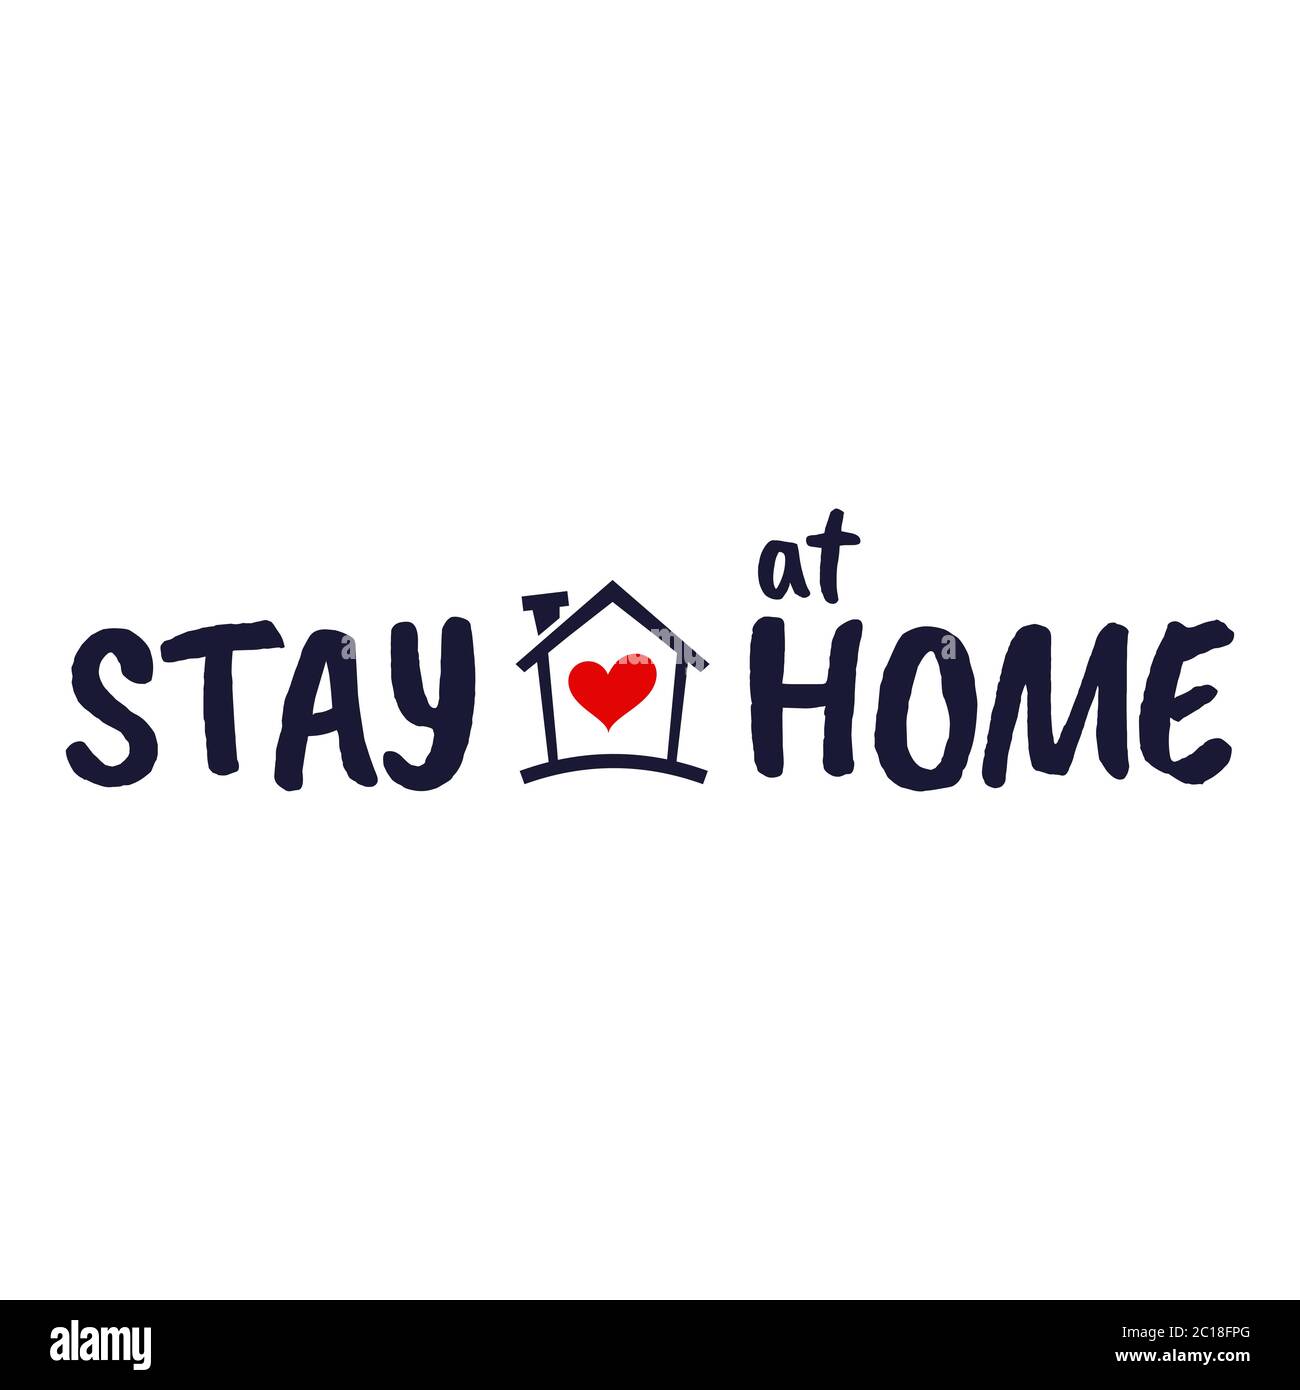 vector illustration of typography of 'Stay at Home' with a house and heart icon. Suitable for self-quarantine campaign and prevention of COVID-19 Stock Vector